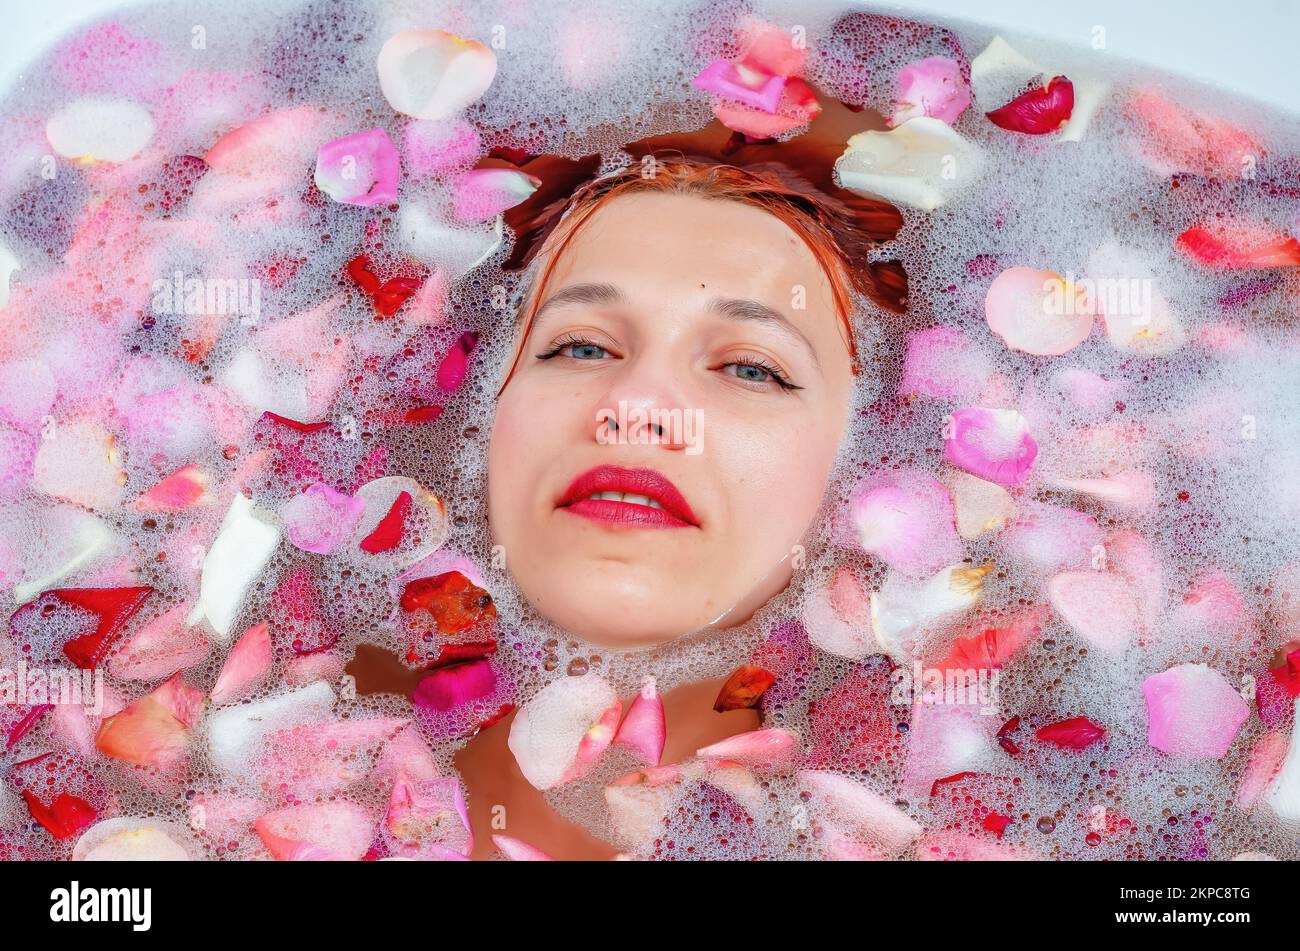 Close up female face in bath with soft white glowing and rose petals. Copyspace for advertising. Beauty, fashion, style, bodycare concept. Attractive Stock Photo